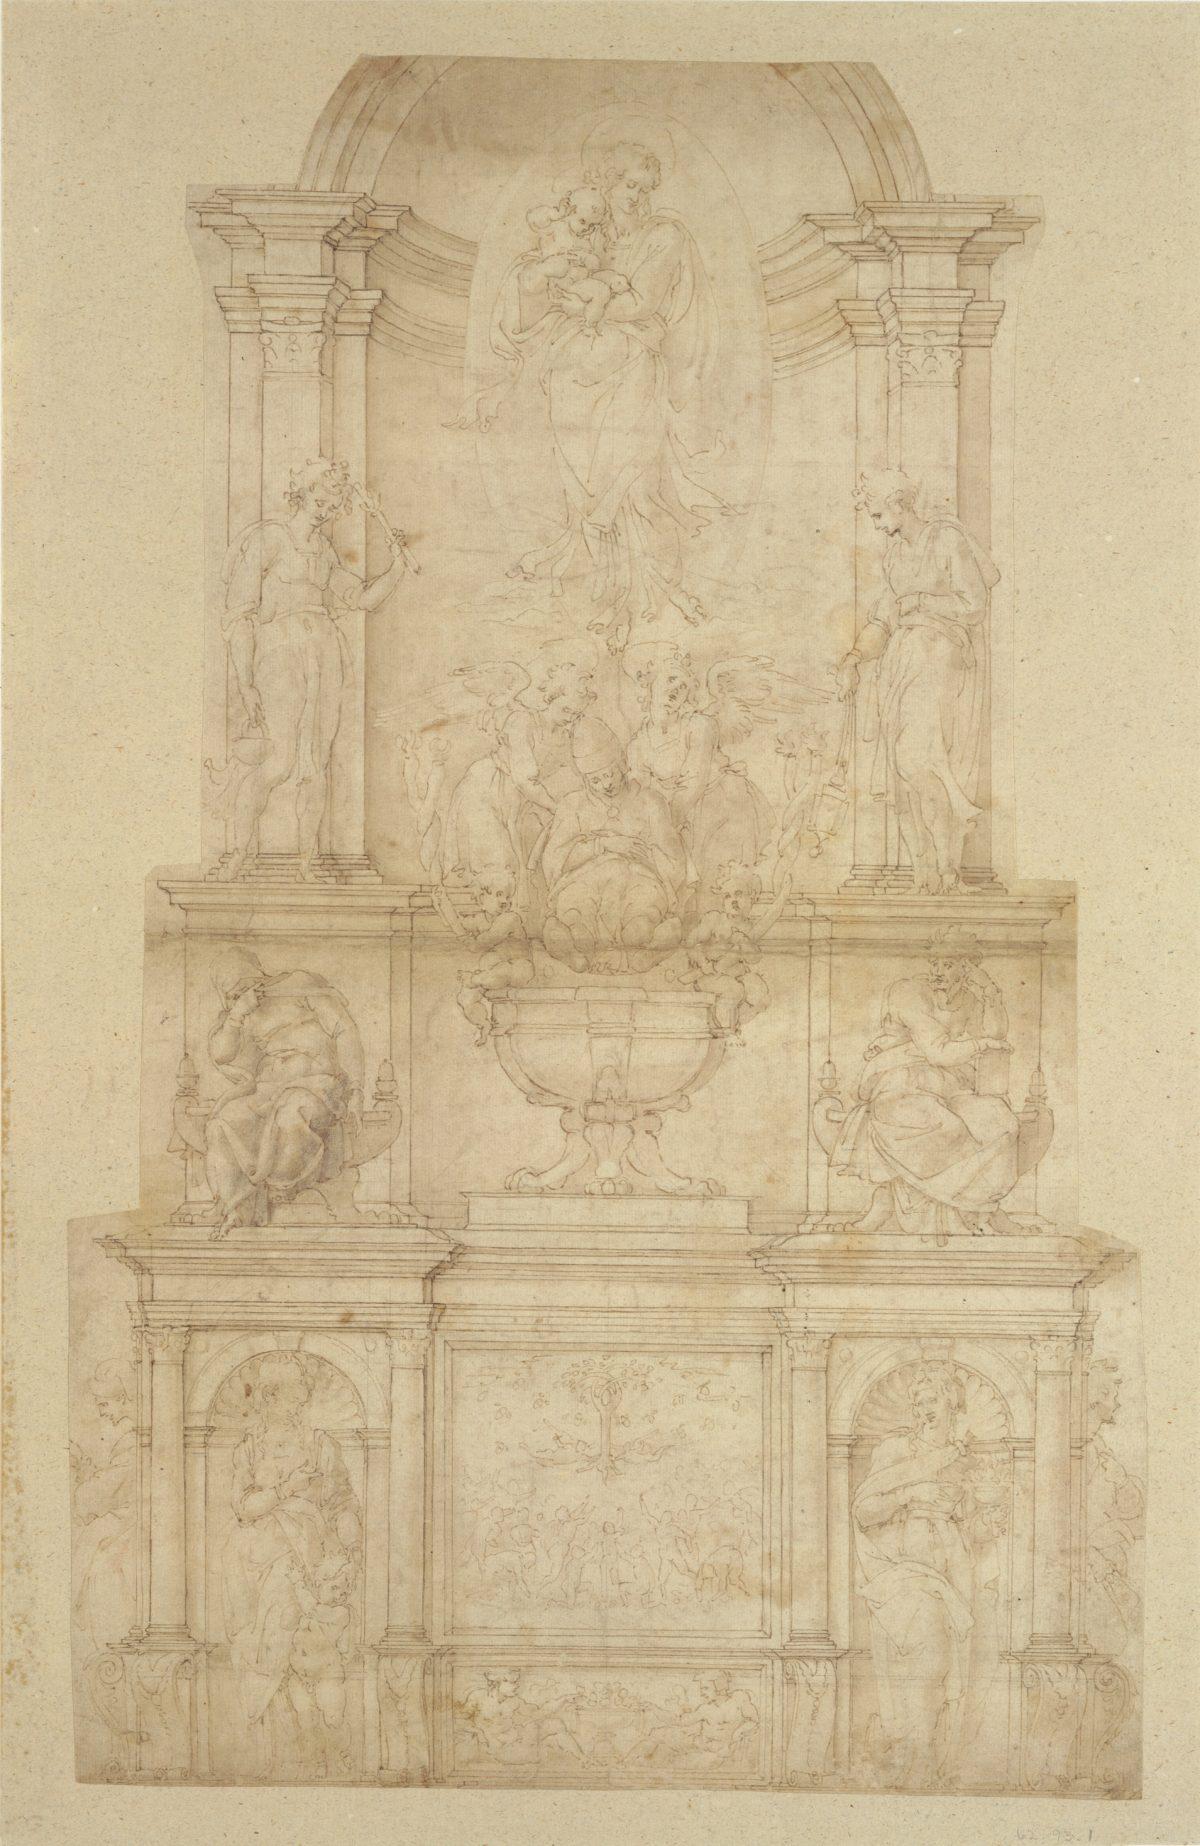 Design for the Tomb of Pope Julius II della Rovere, 1505–1506, by Michelangelo Buonarroti (1475–1564). Pen and brown ink, brush and brown wash, over stylus ruling and leadpoint. 20-1/16 inches by 12-9/16 inches. The Metropolitan Museum of Art, Rogers Fund, 1962. (The Metropolitan Museum of Art)